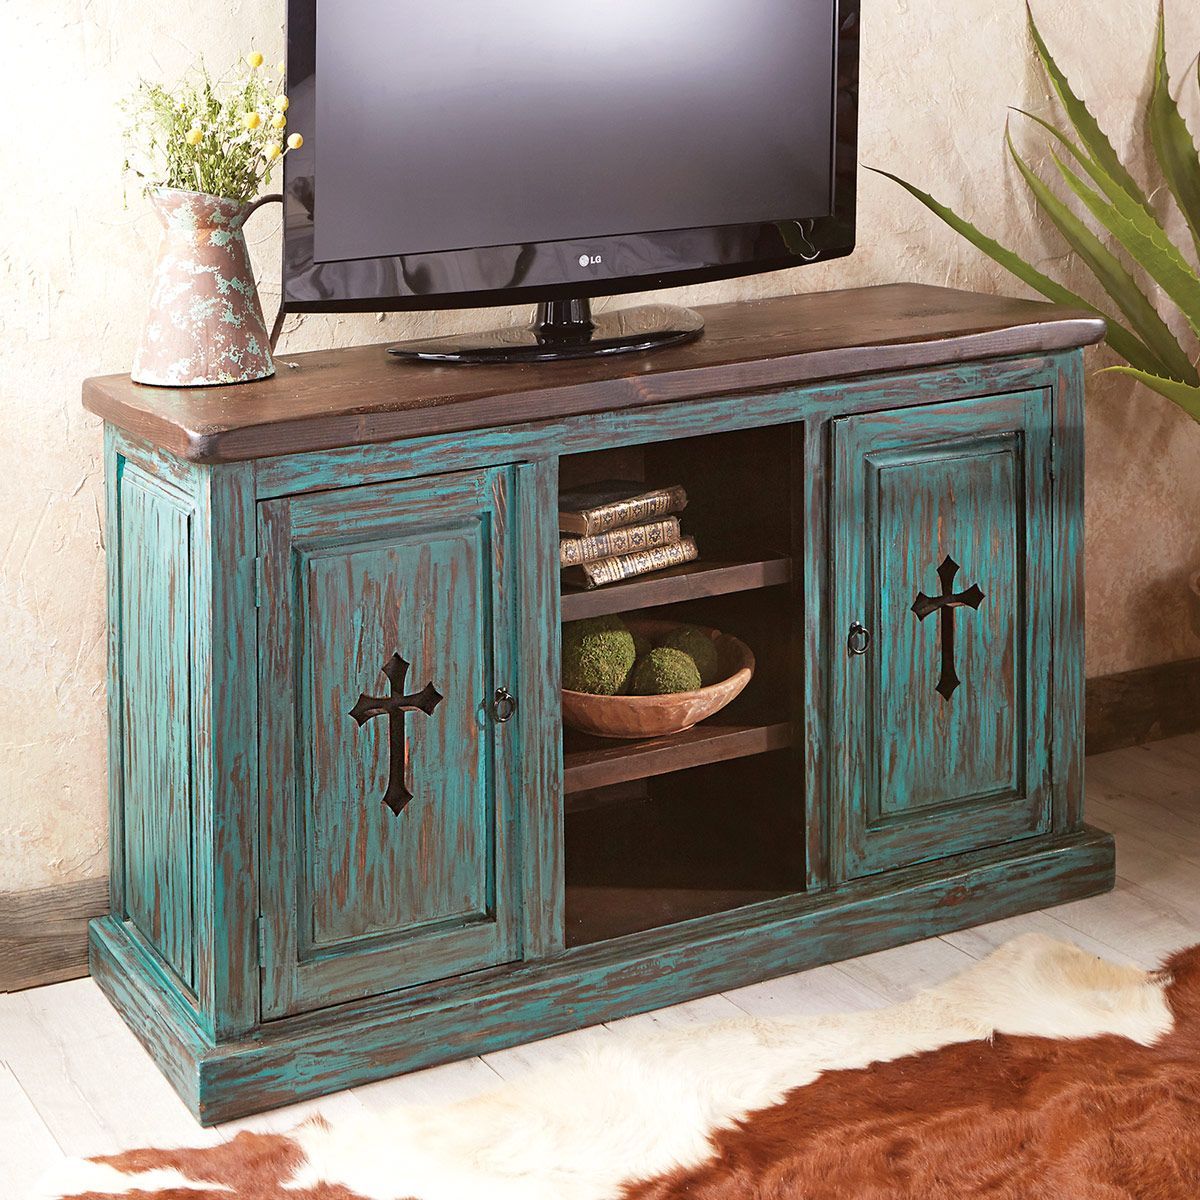 Rustic Tv Stands: Santa Fe Turquoise Cross Tv Console In Rustic Tv Stands (View 4 of 15)